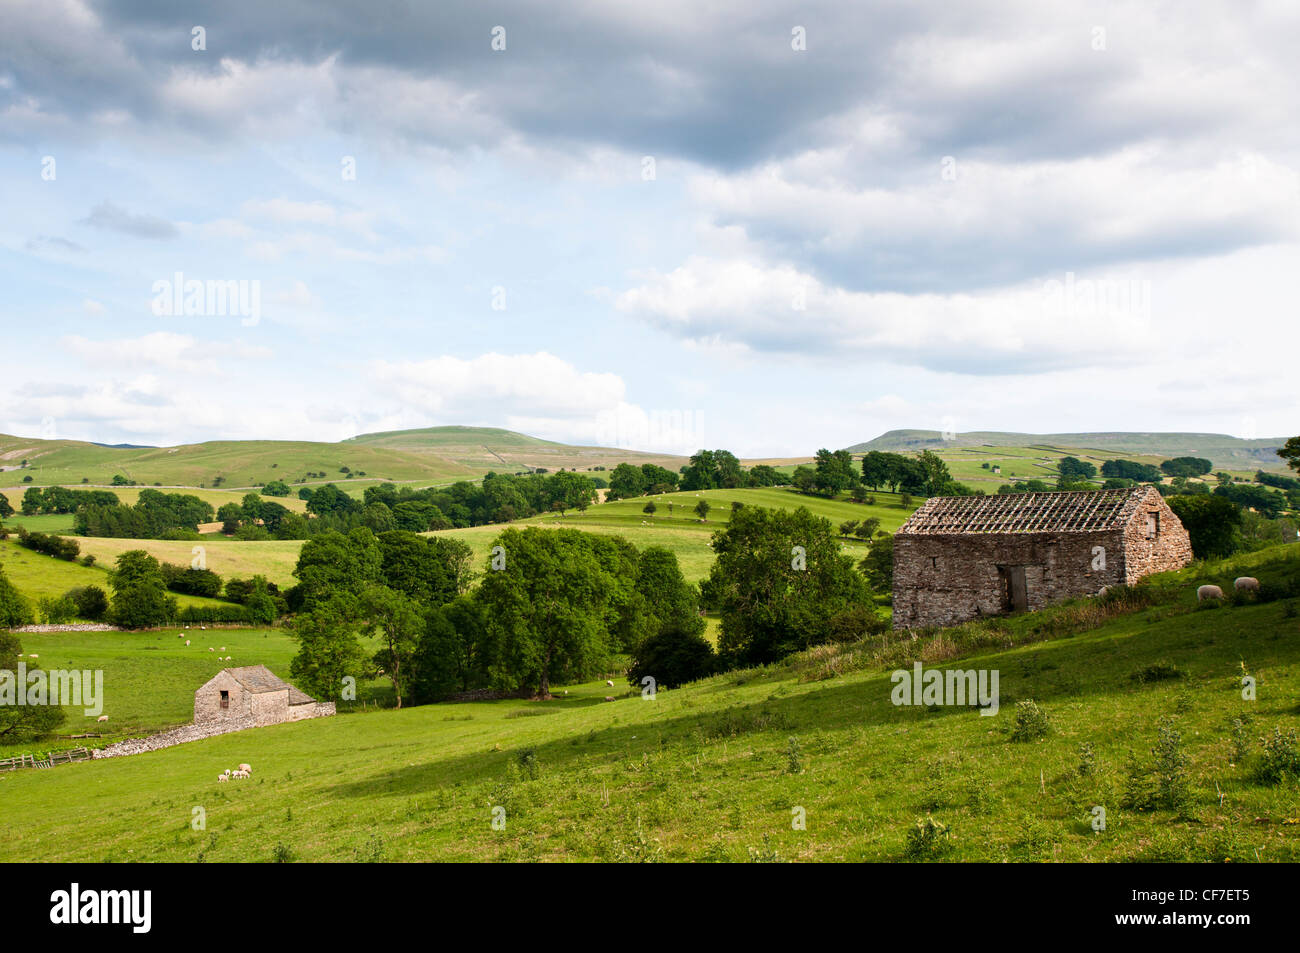 Residential structures in agricultural farmland, Yorkshire-Dales region in North-England, Great Britain, Europe Stock Photo